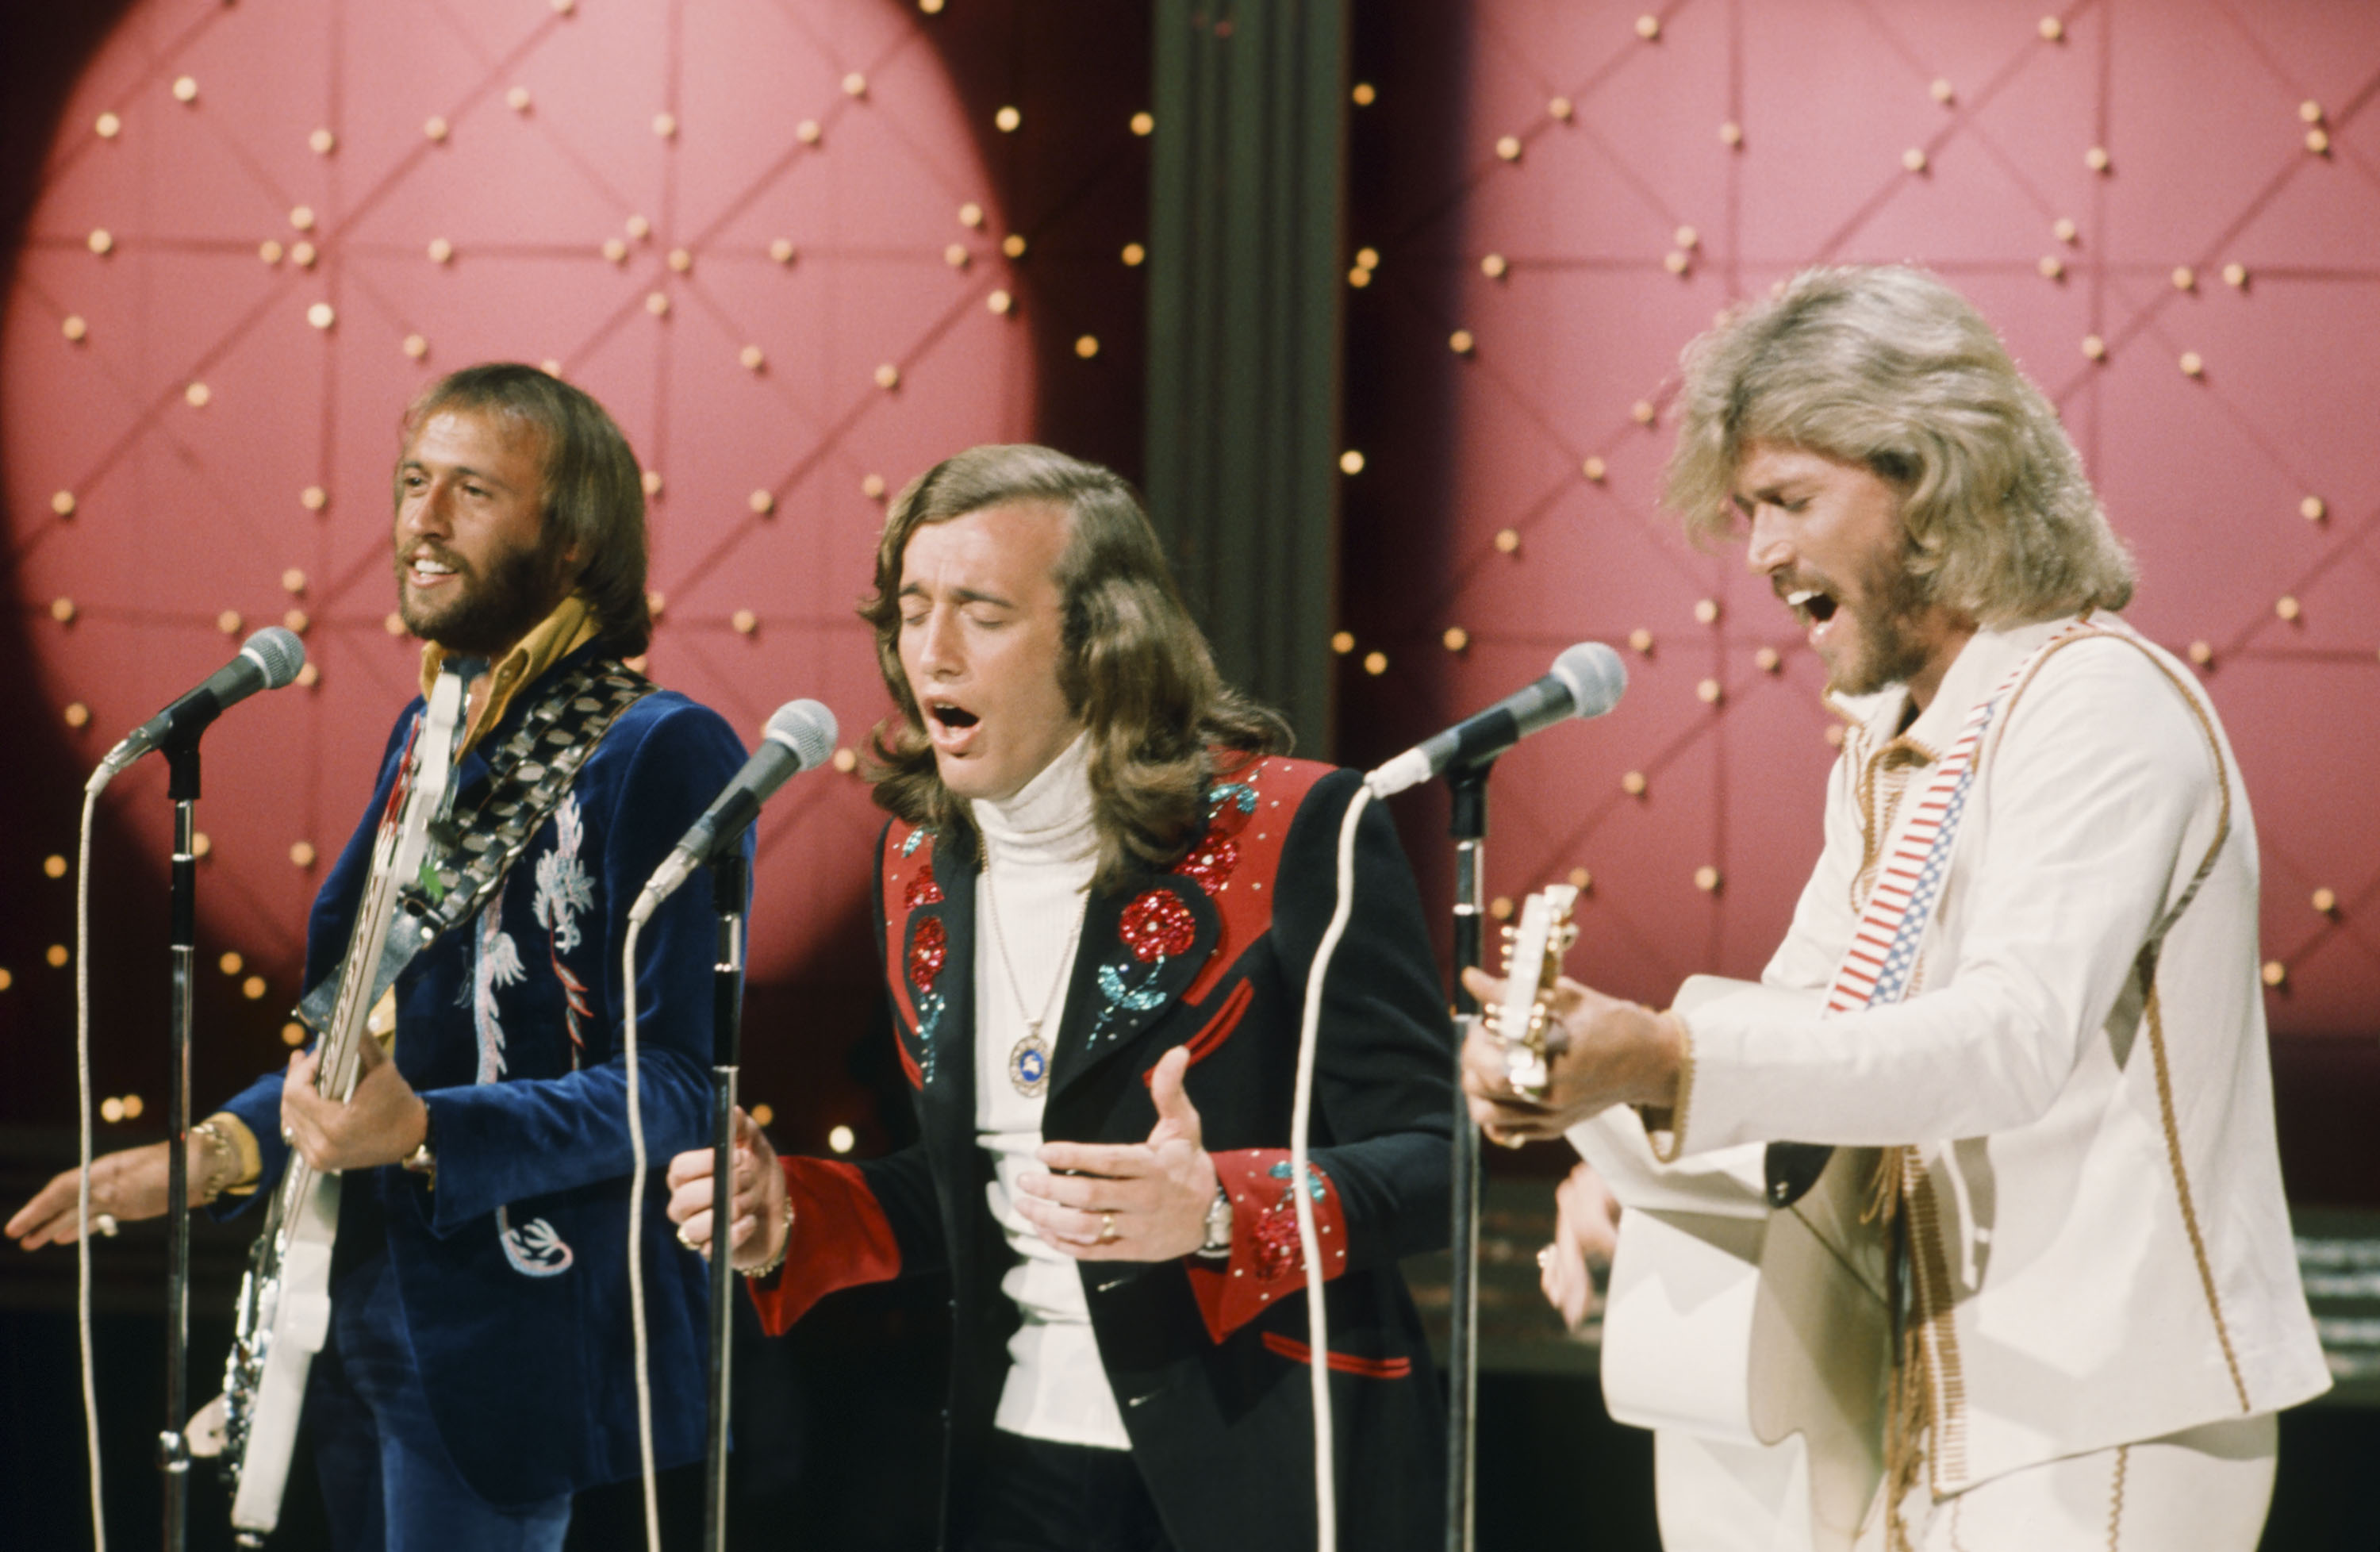 the bee gees’ barry gibb has written more hit songs than almost anyone